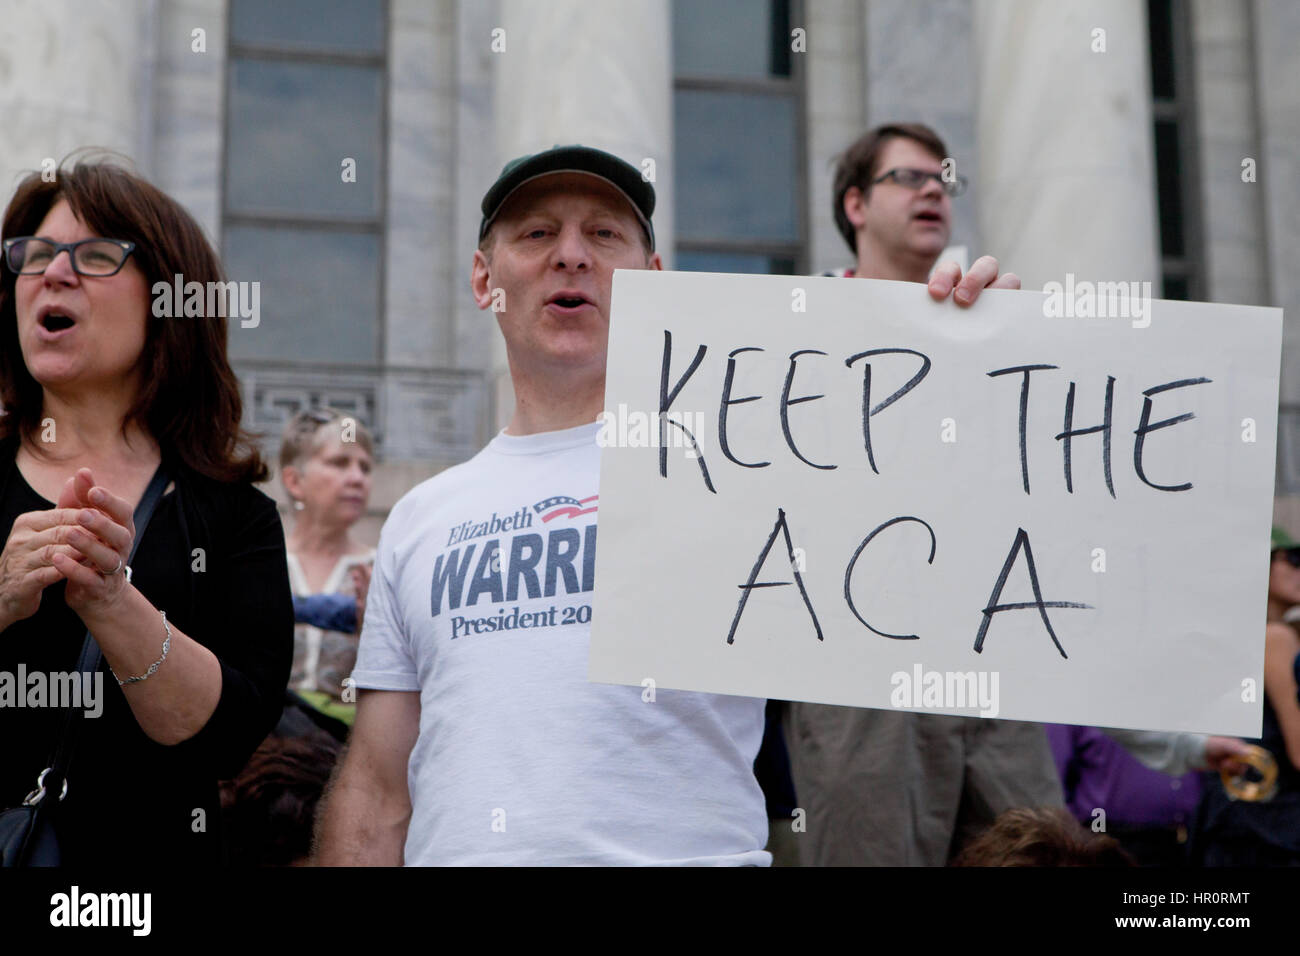 Washington DC, USA. 25th February 2017. Progressive activists (Obamacare supporters) rally and protest against the Republican Congress plans to repeal and replace the Affordable Care Act ( ACA ) on Capitol Hill. Credit: B Christopher/Alamy Live News Stock Photo